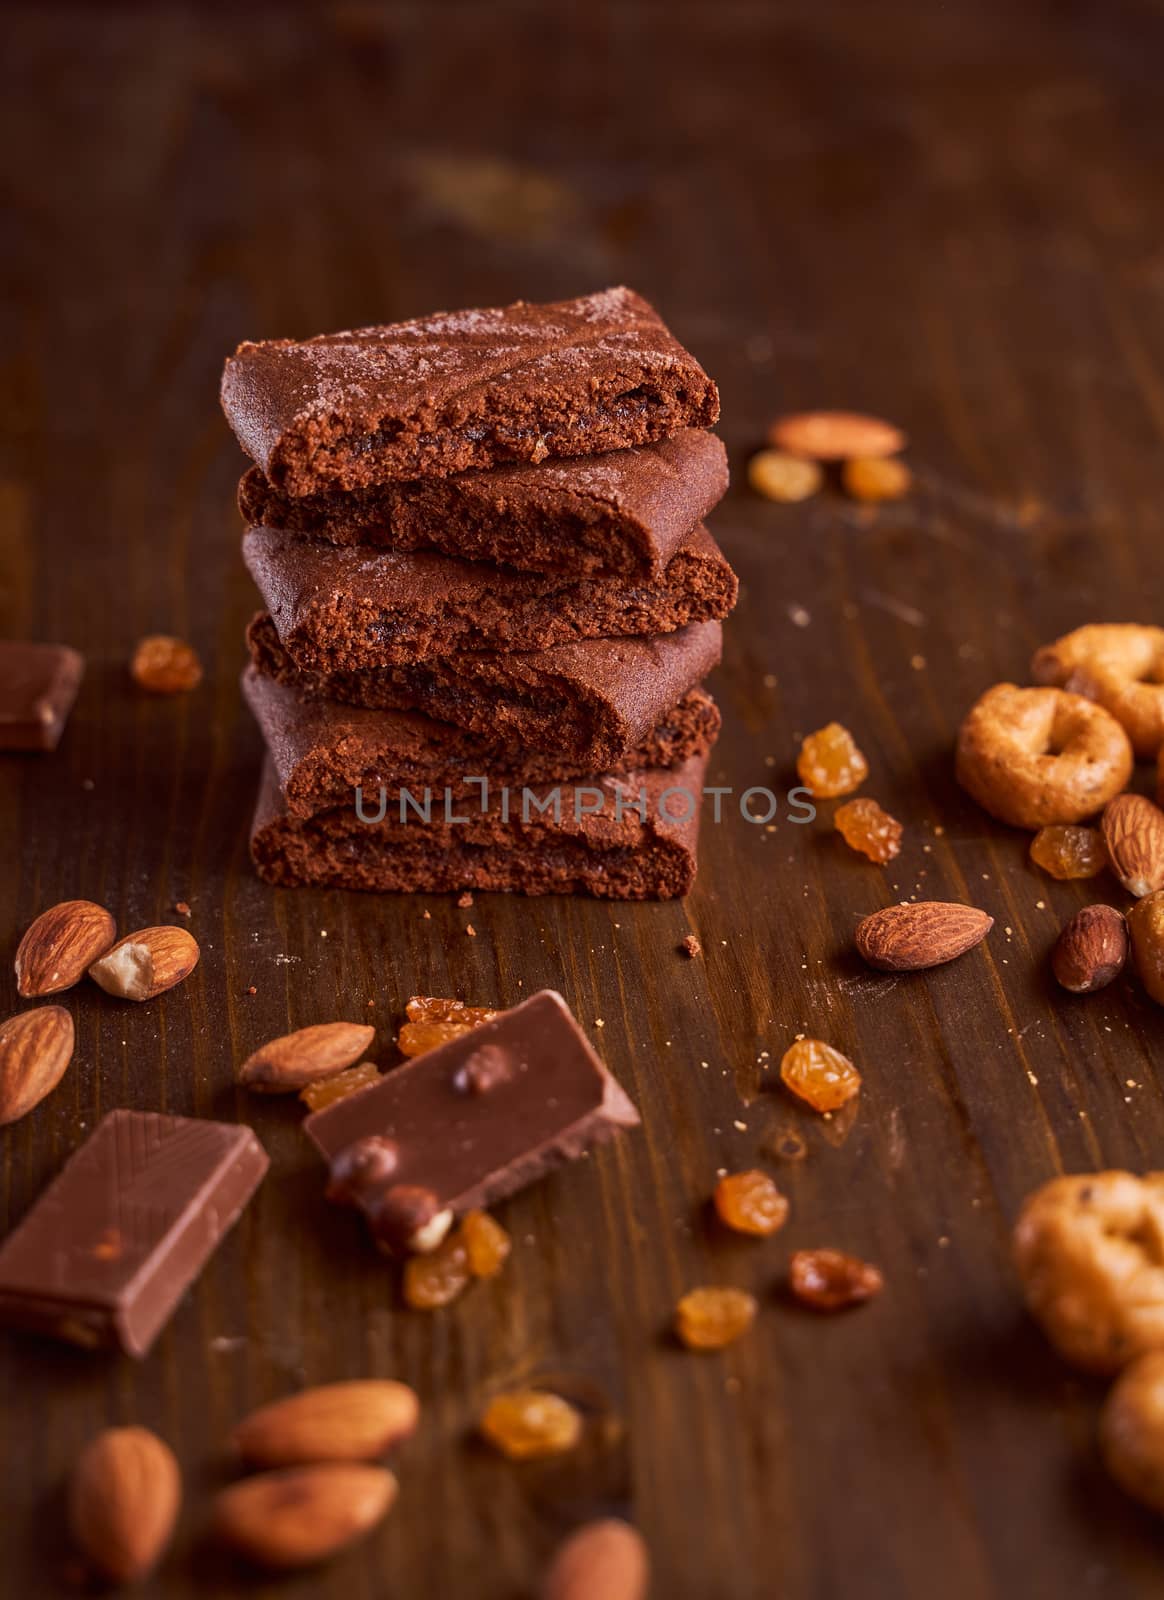 Chocolate cakes stacked on a wooden table. High quality photo